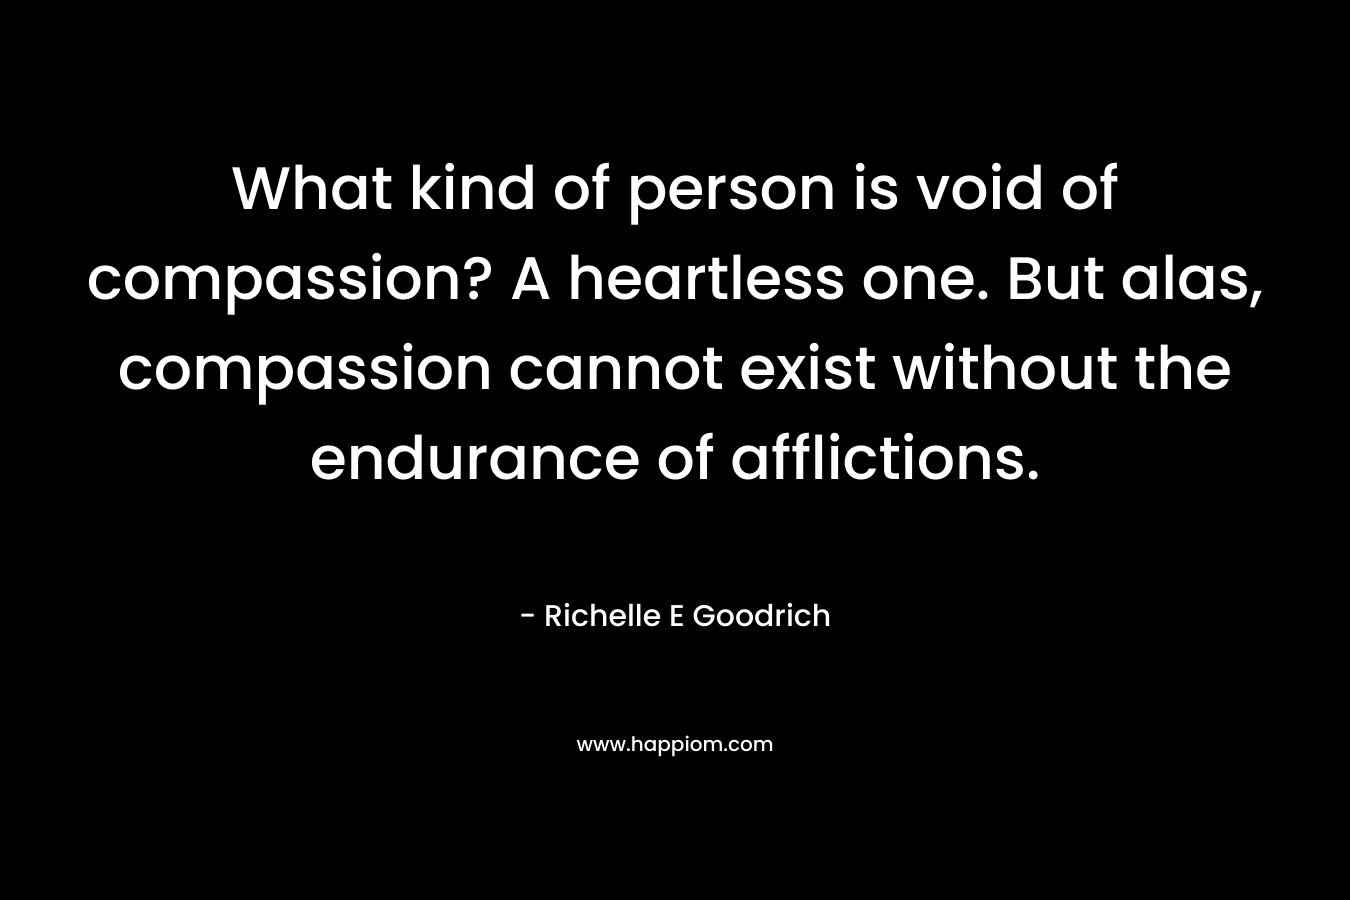 What kind of person is void of compassion? A heartless one. But alas, compassion cannot exist without the endurance of afflictions. – Richelle E Goodrich